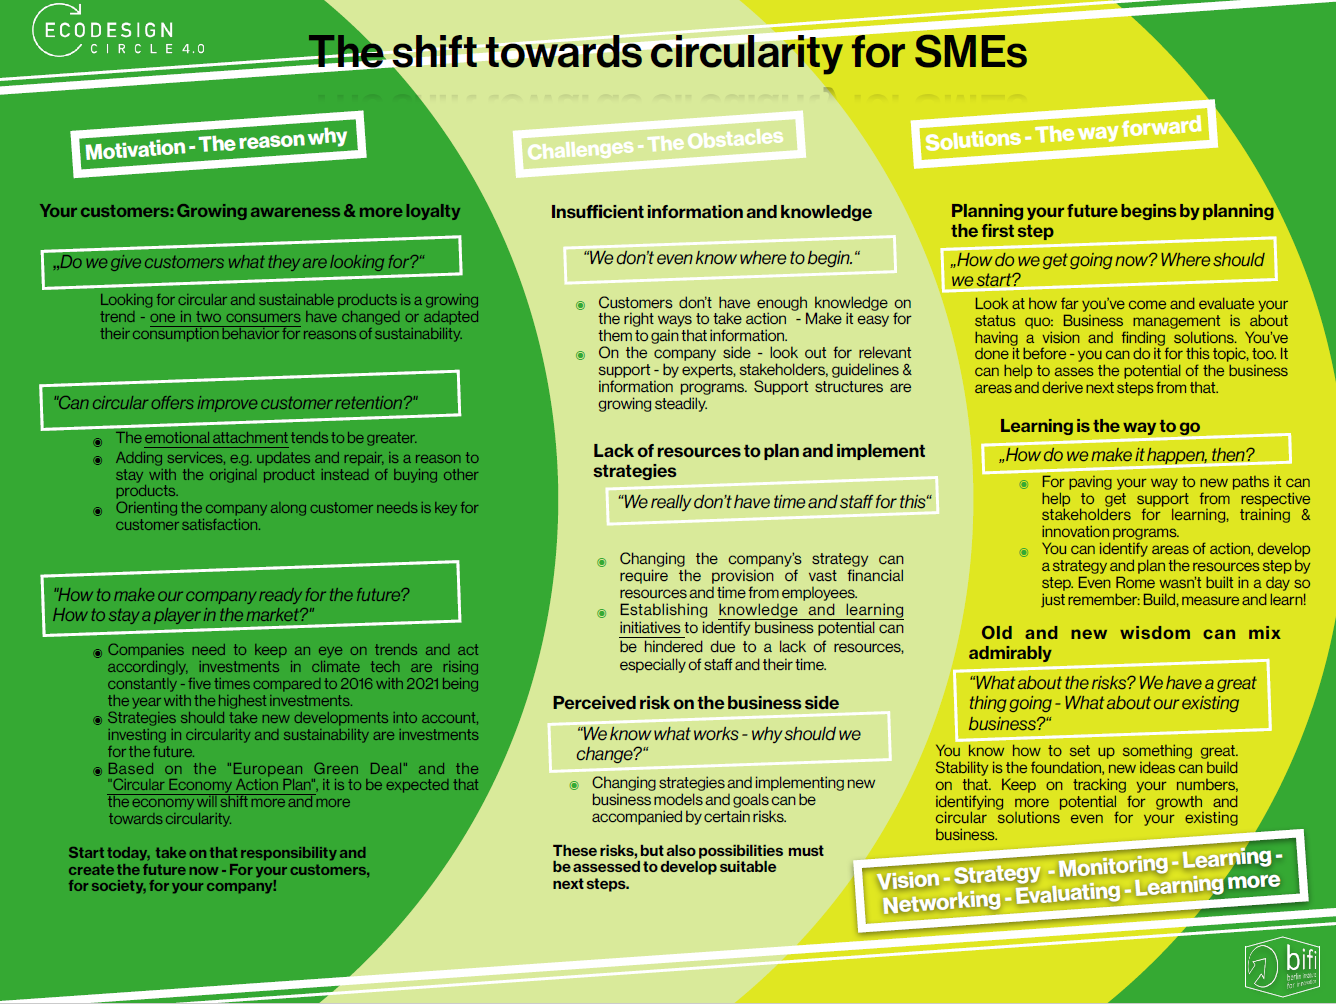 The Shift Towards Circularity fopr SMEs